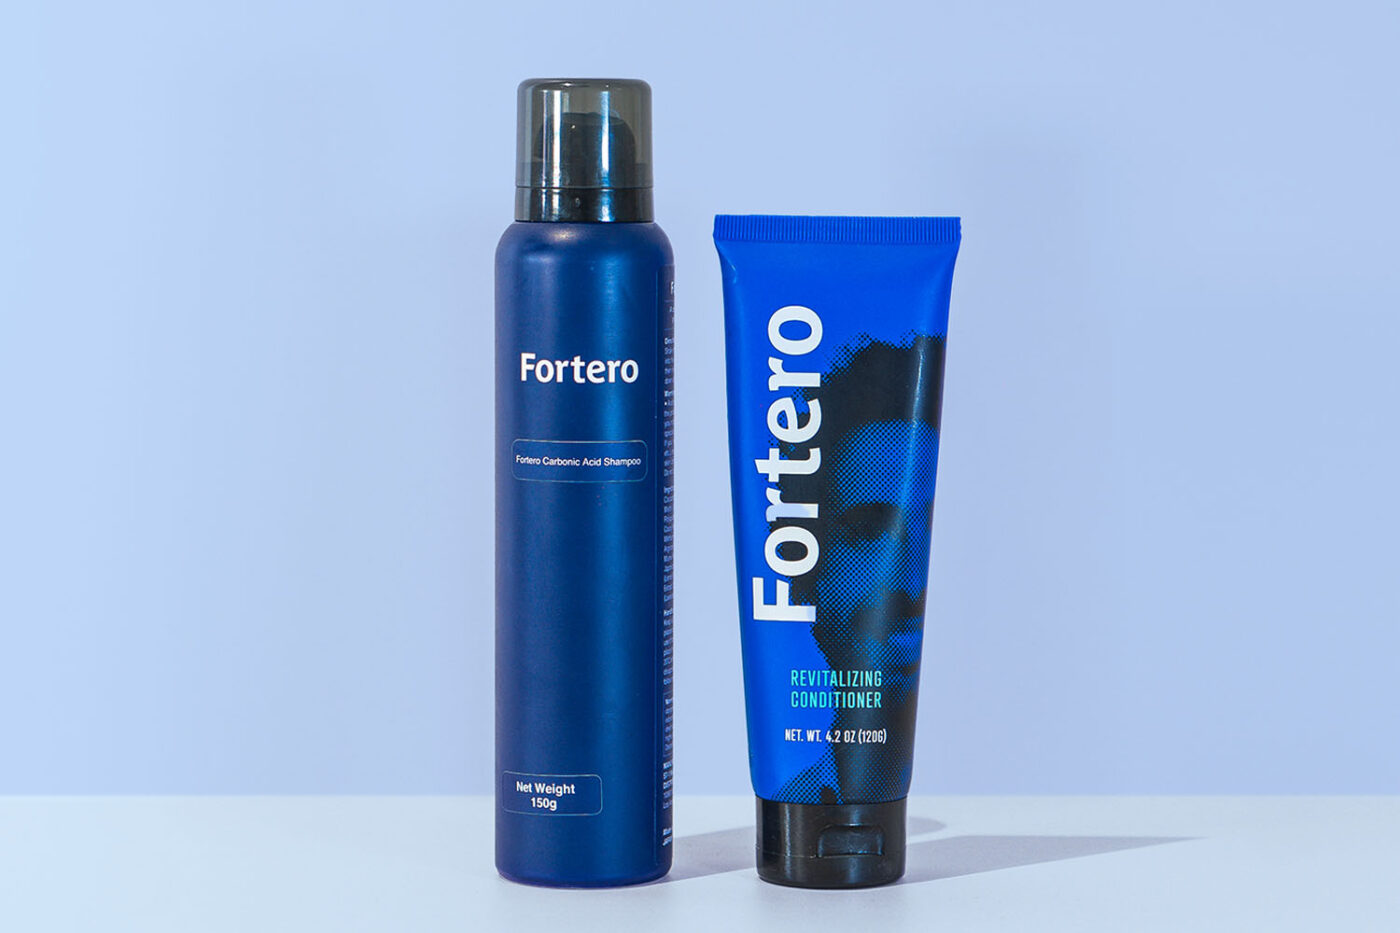 Fortero Shampoo Review: Does Carbonic Acid Really Work For Hair Loss?